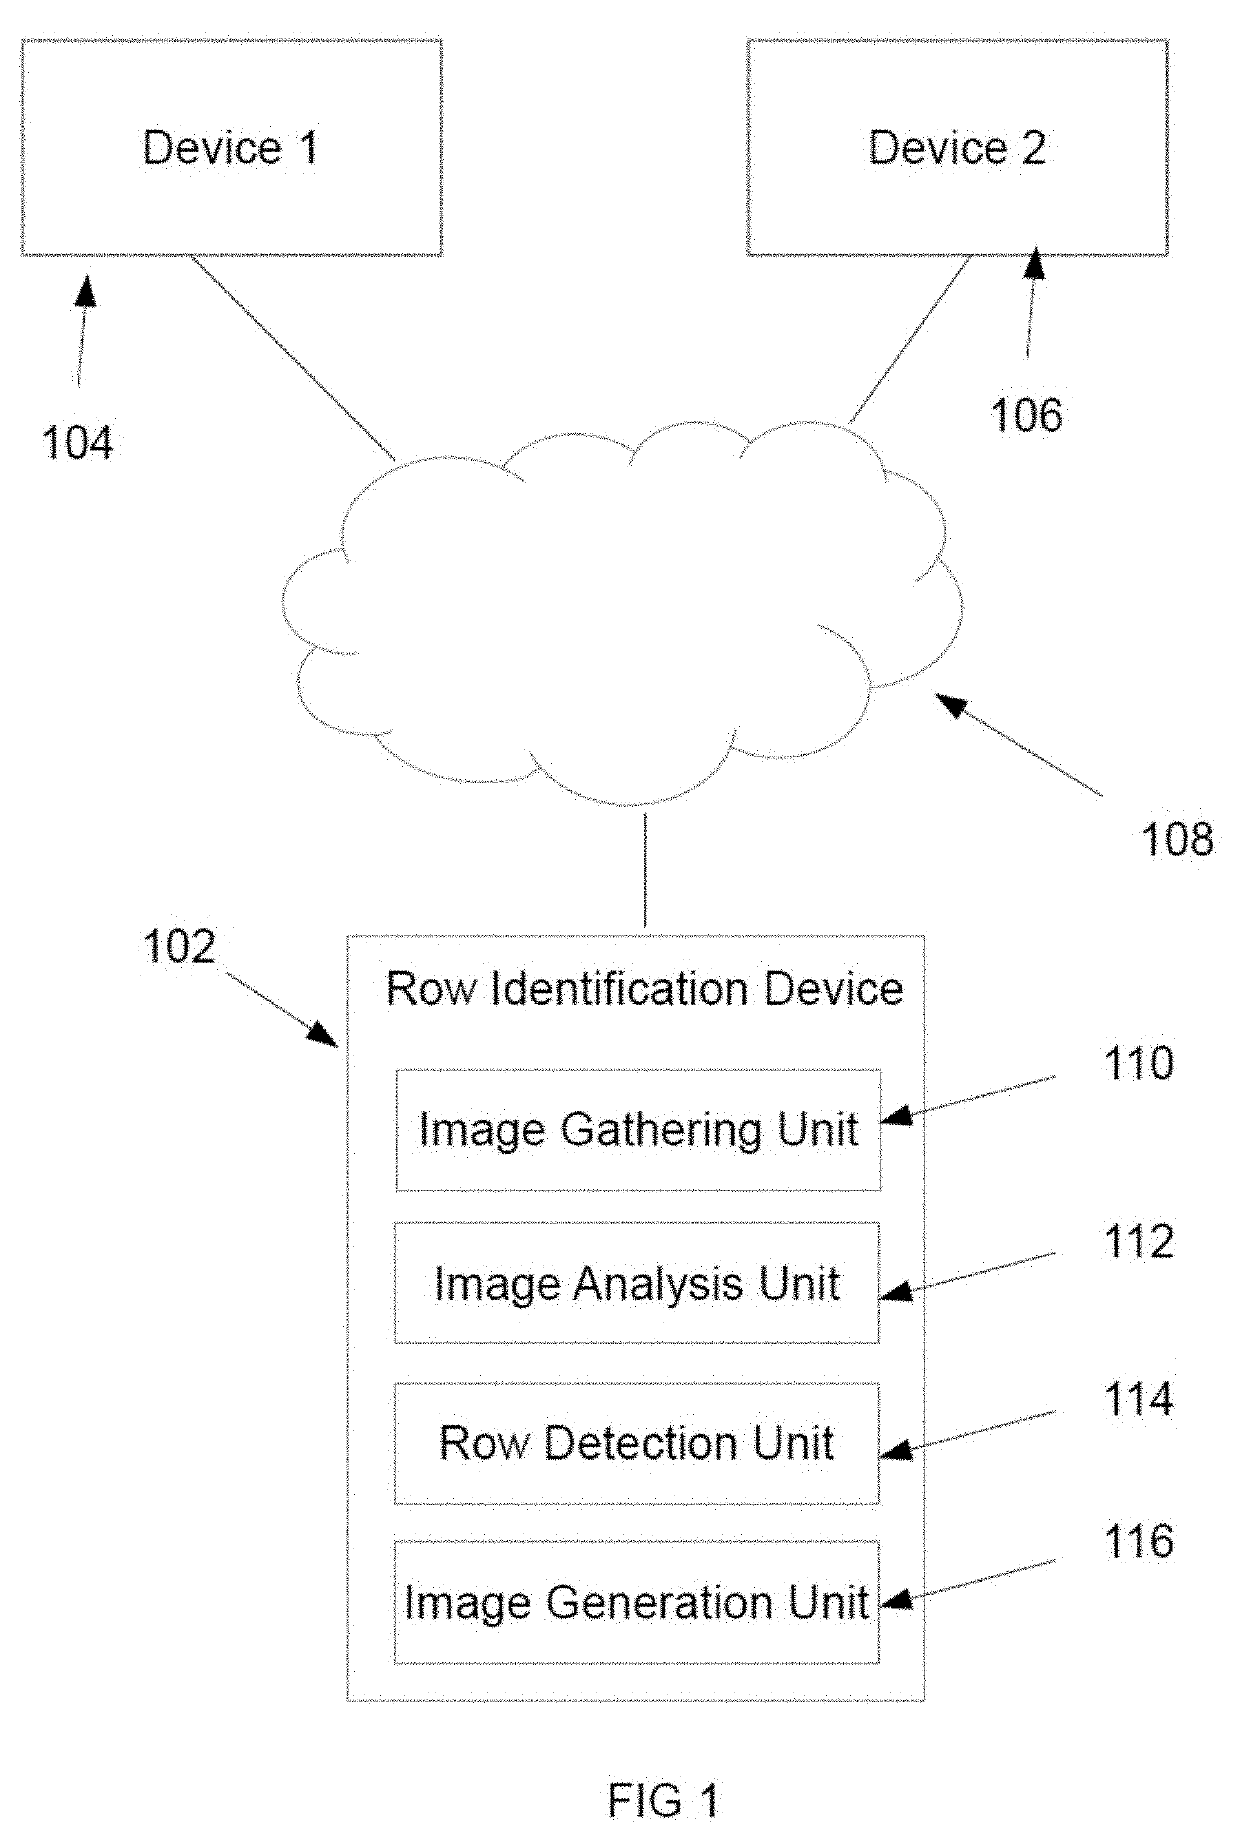 Row Detection System